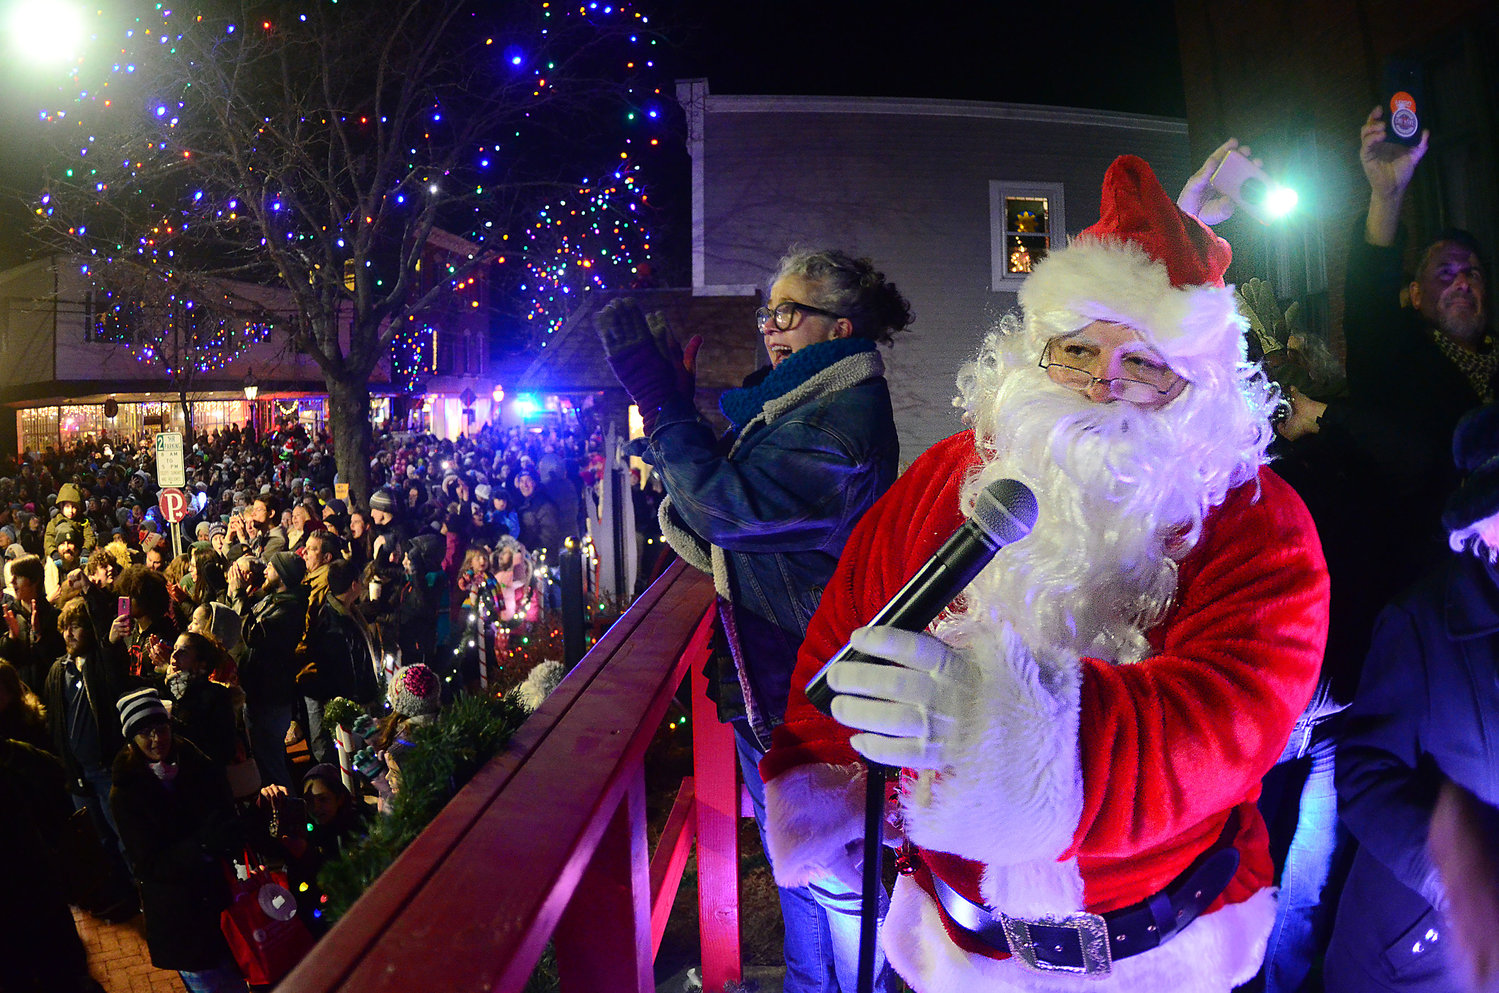 Santa helps count down the lighting of Main Street during the 2019 festival.